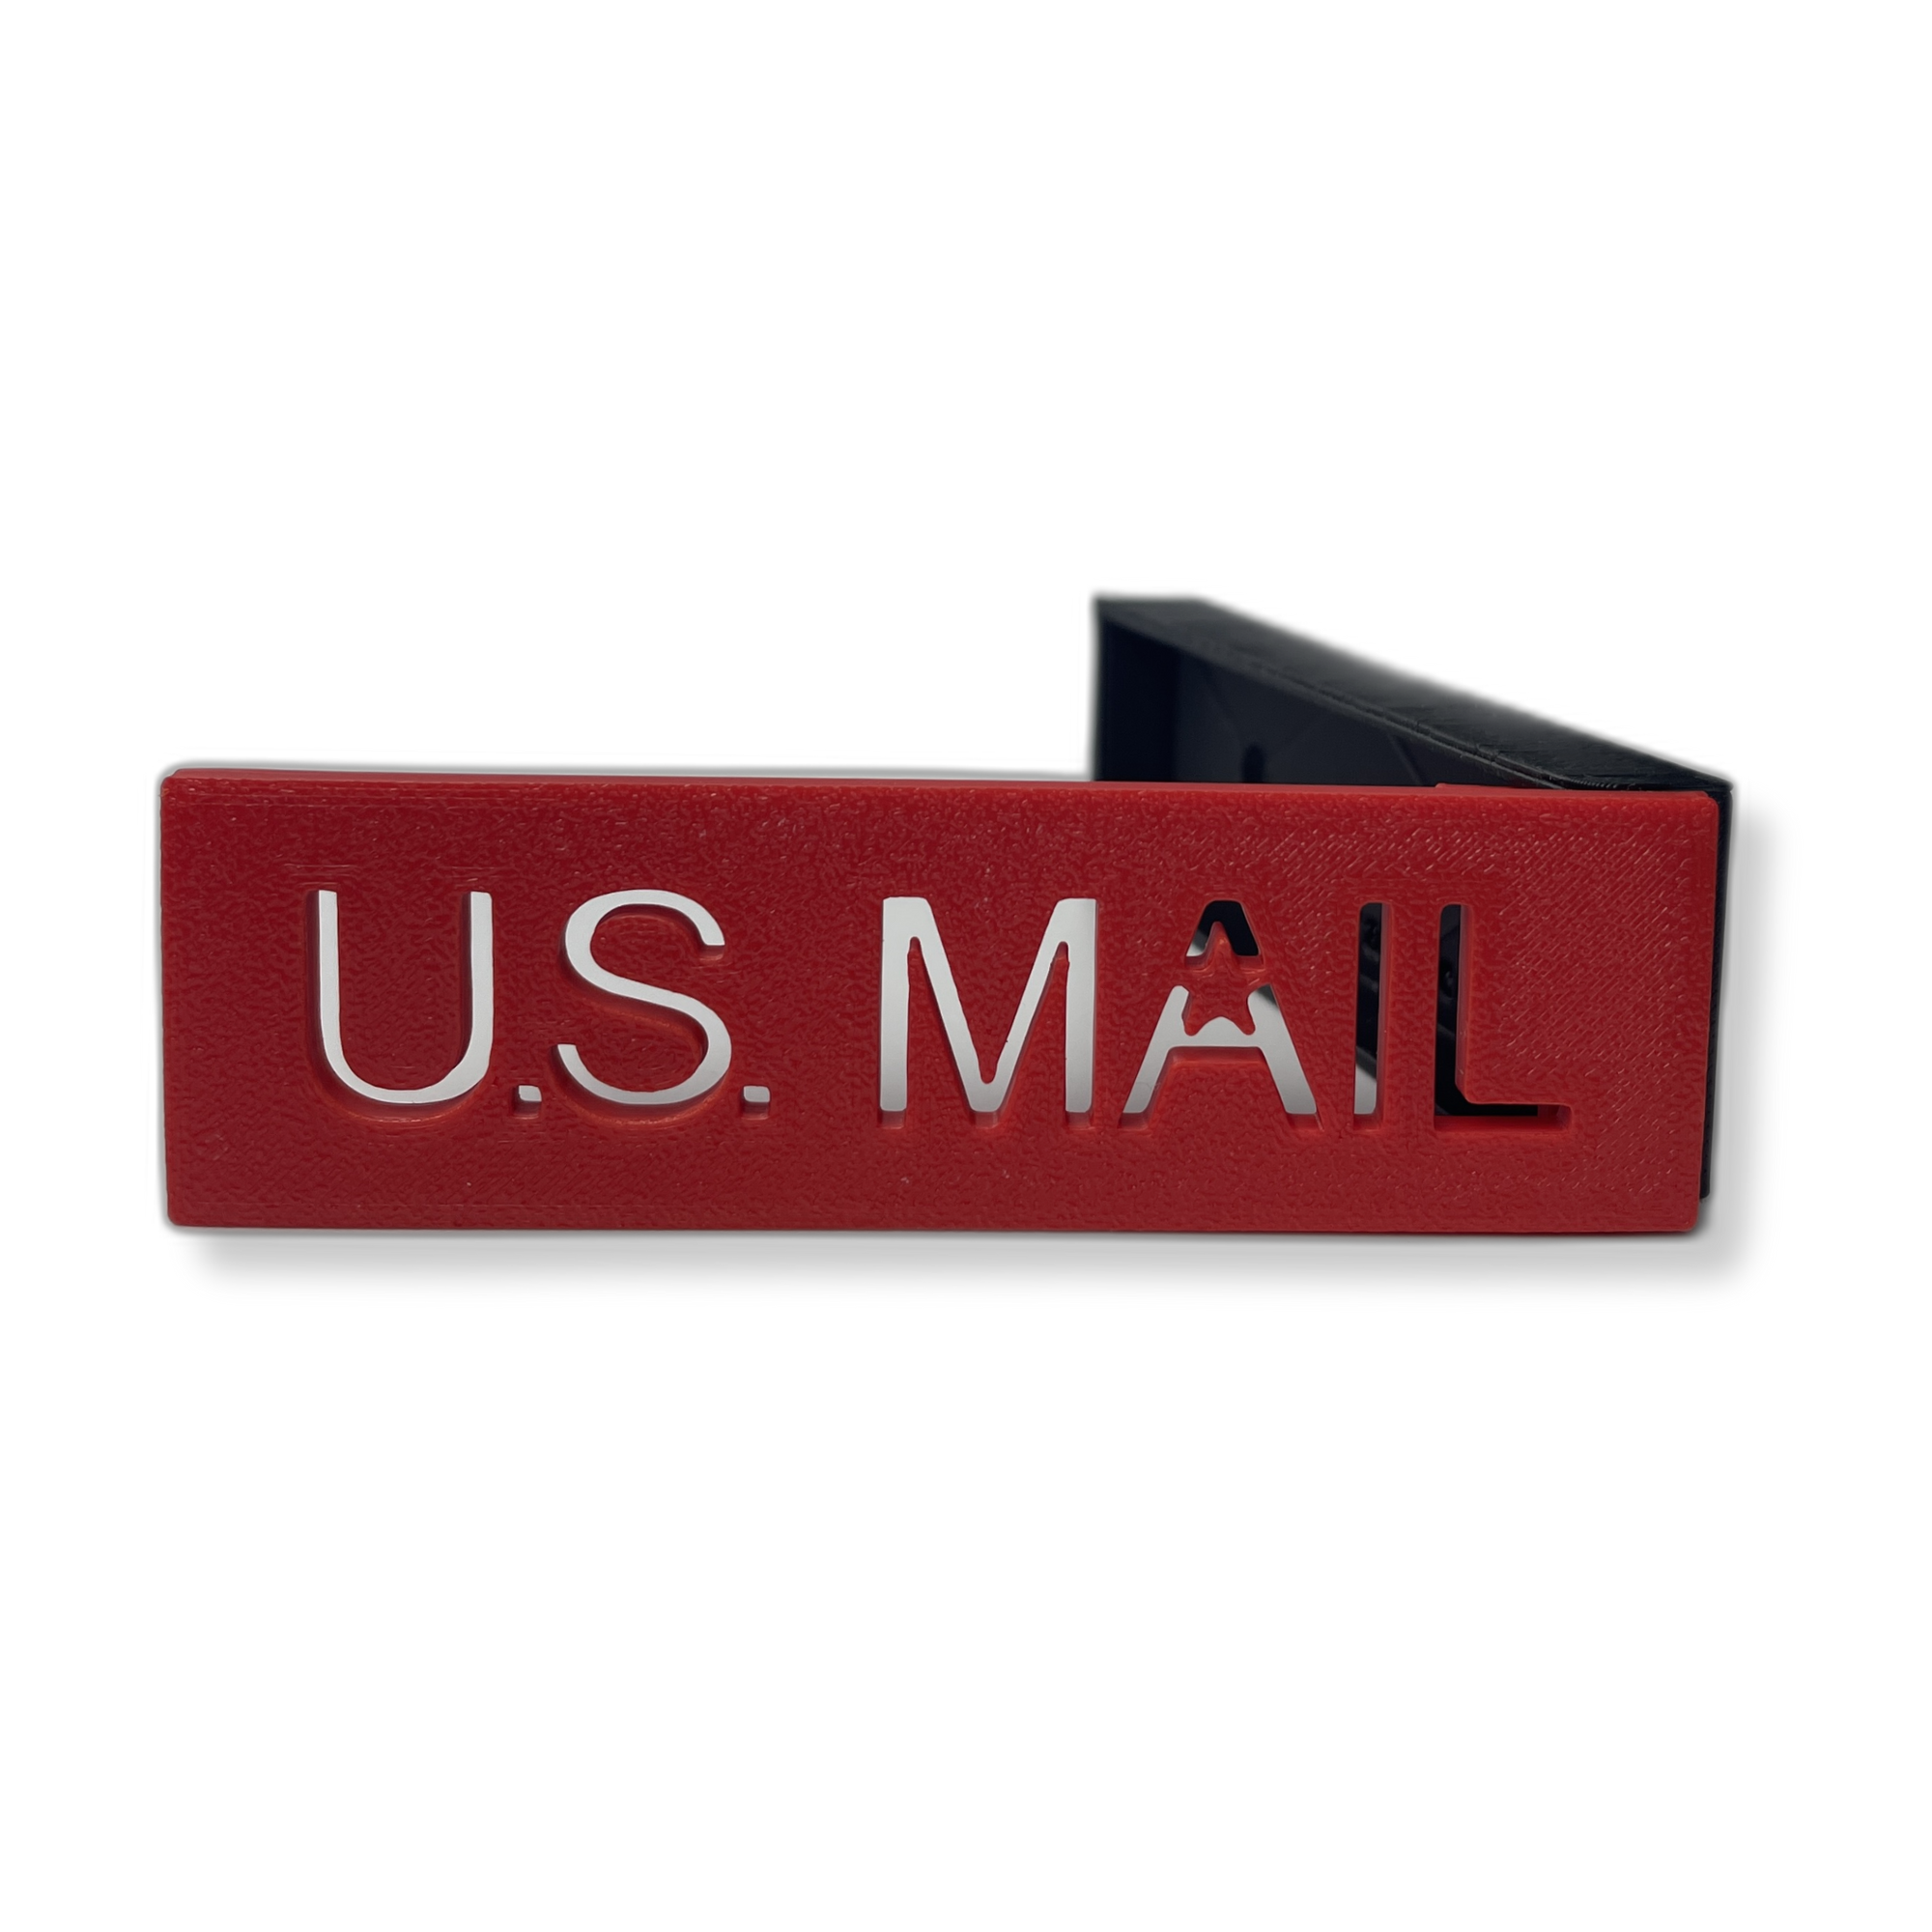 Sleek US MAIL Mailbox Flag for Stone or Brick Mailboxes